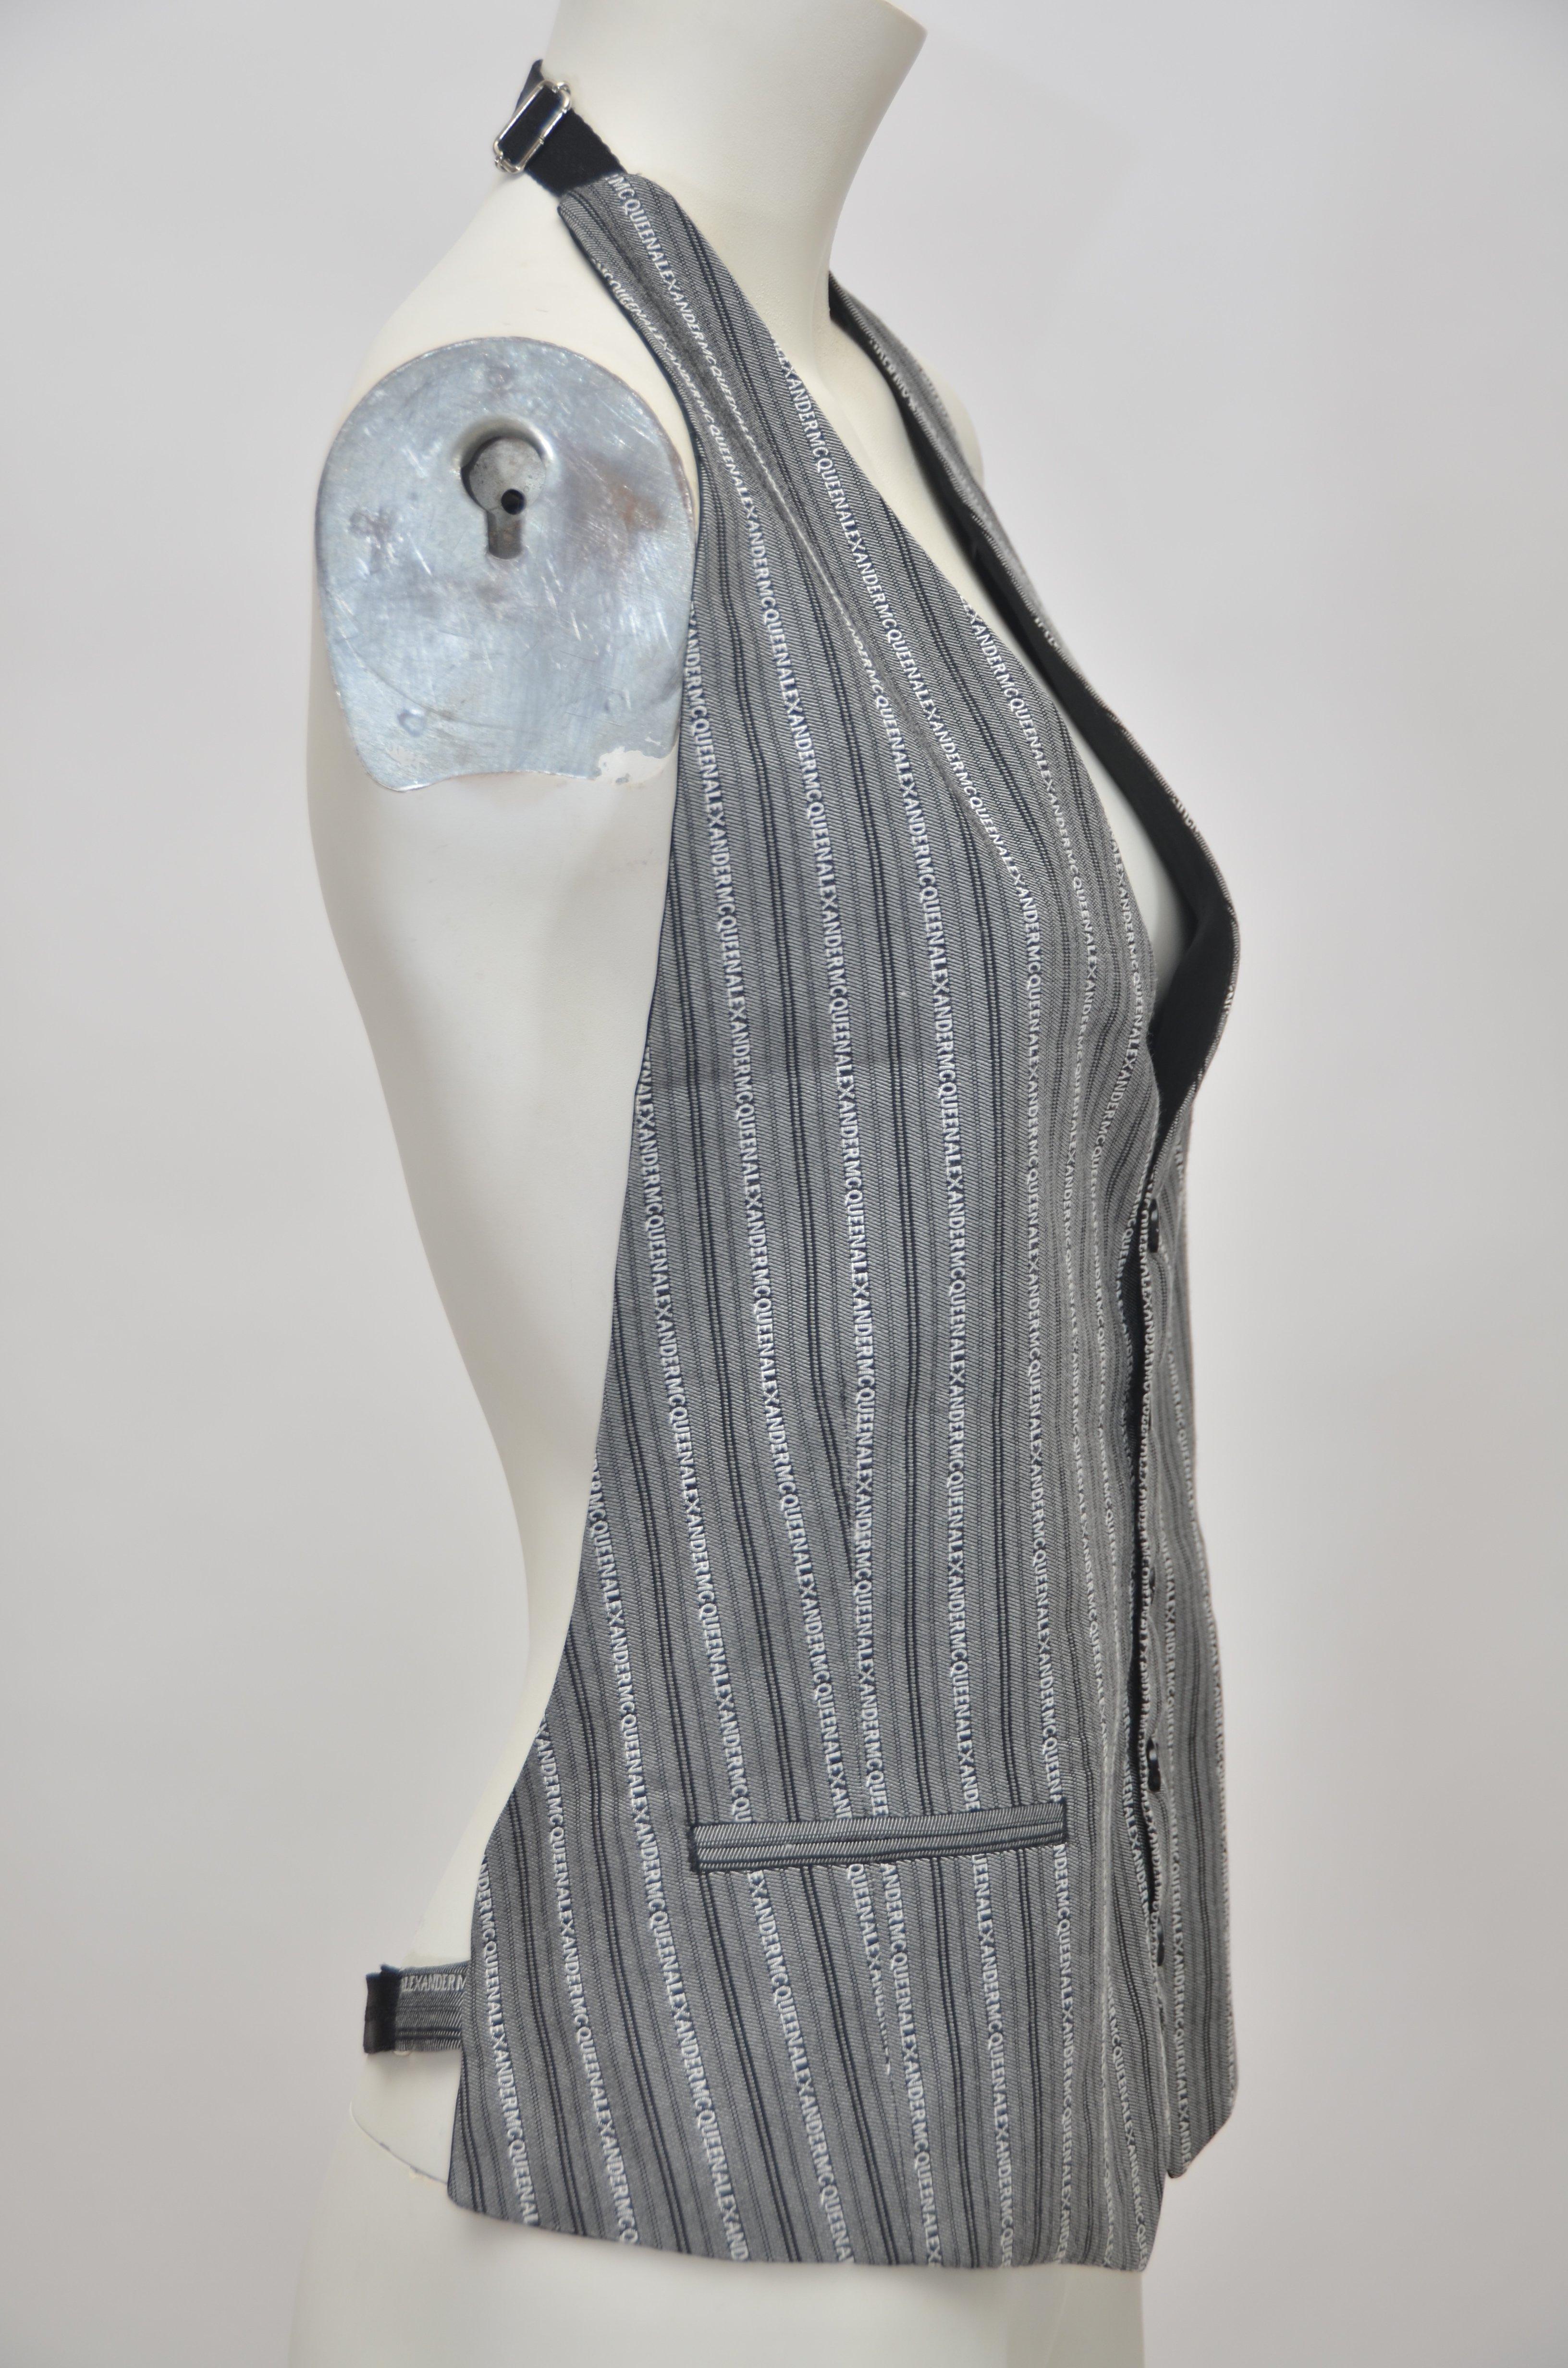 Alexander McQueen printed vintage vest
From 1990's
Very good condition.
FINAL SALE.